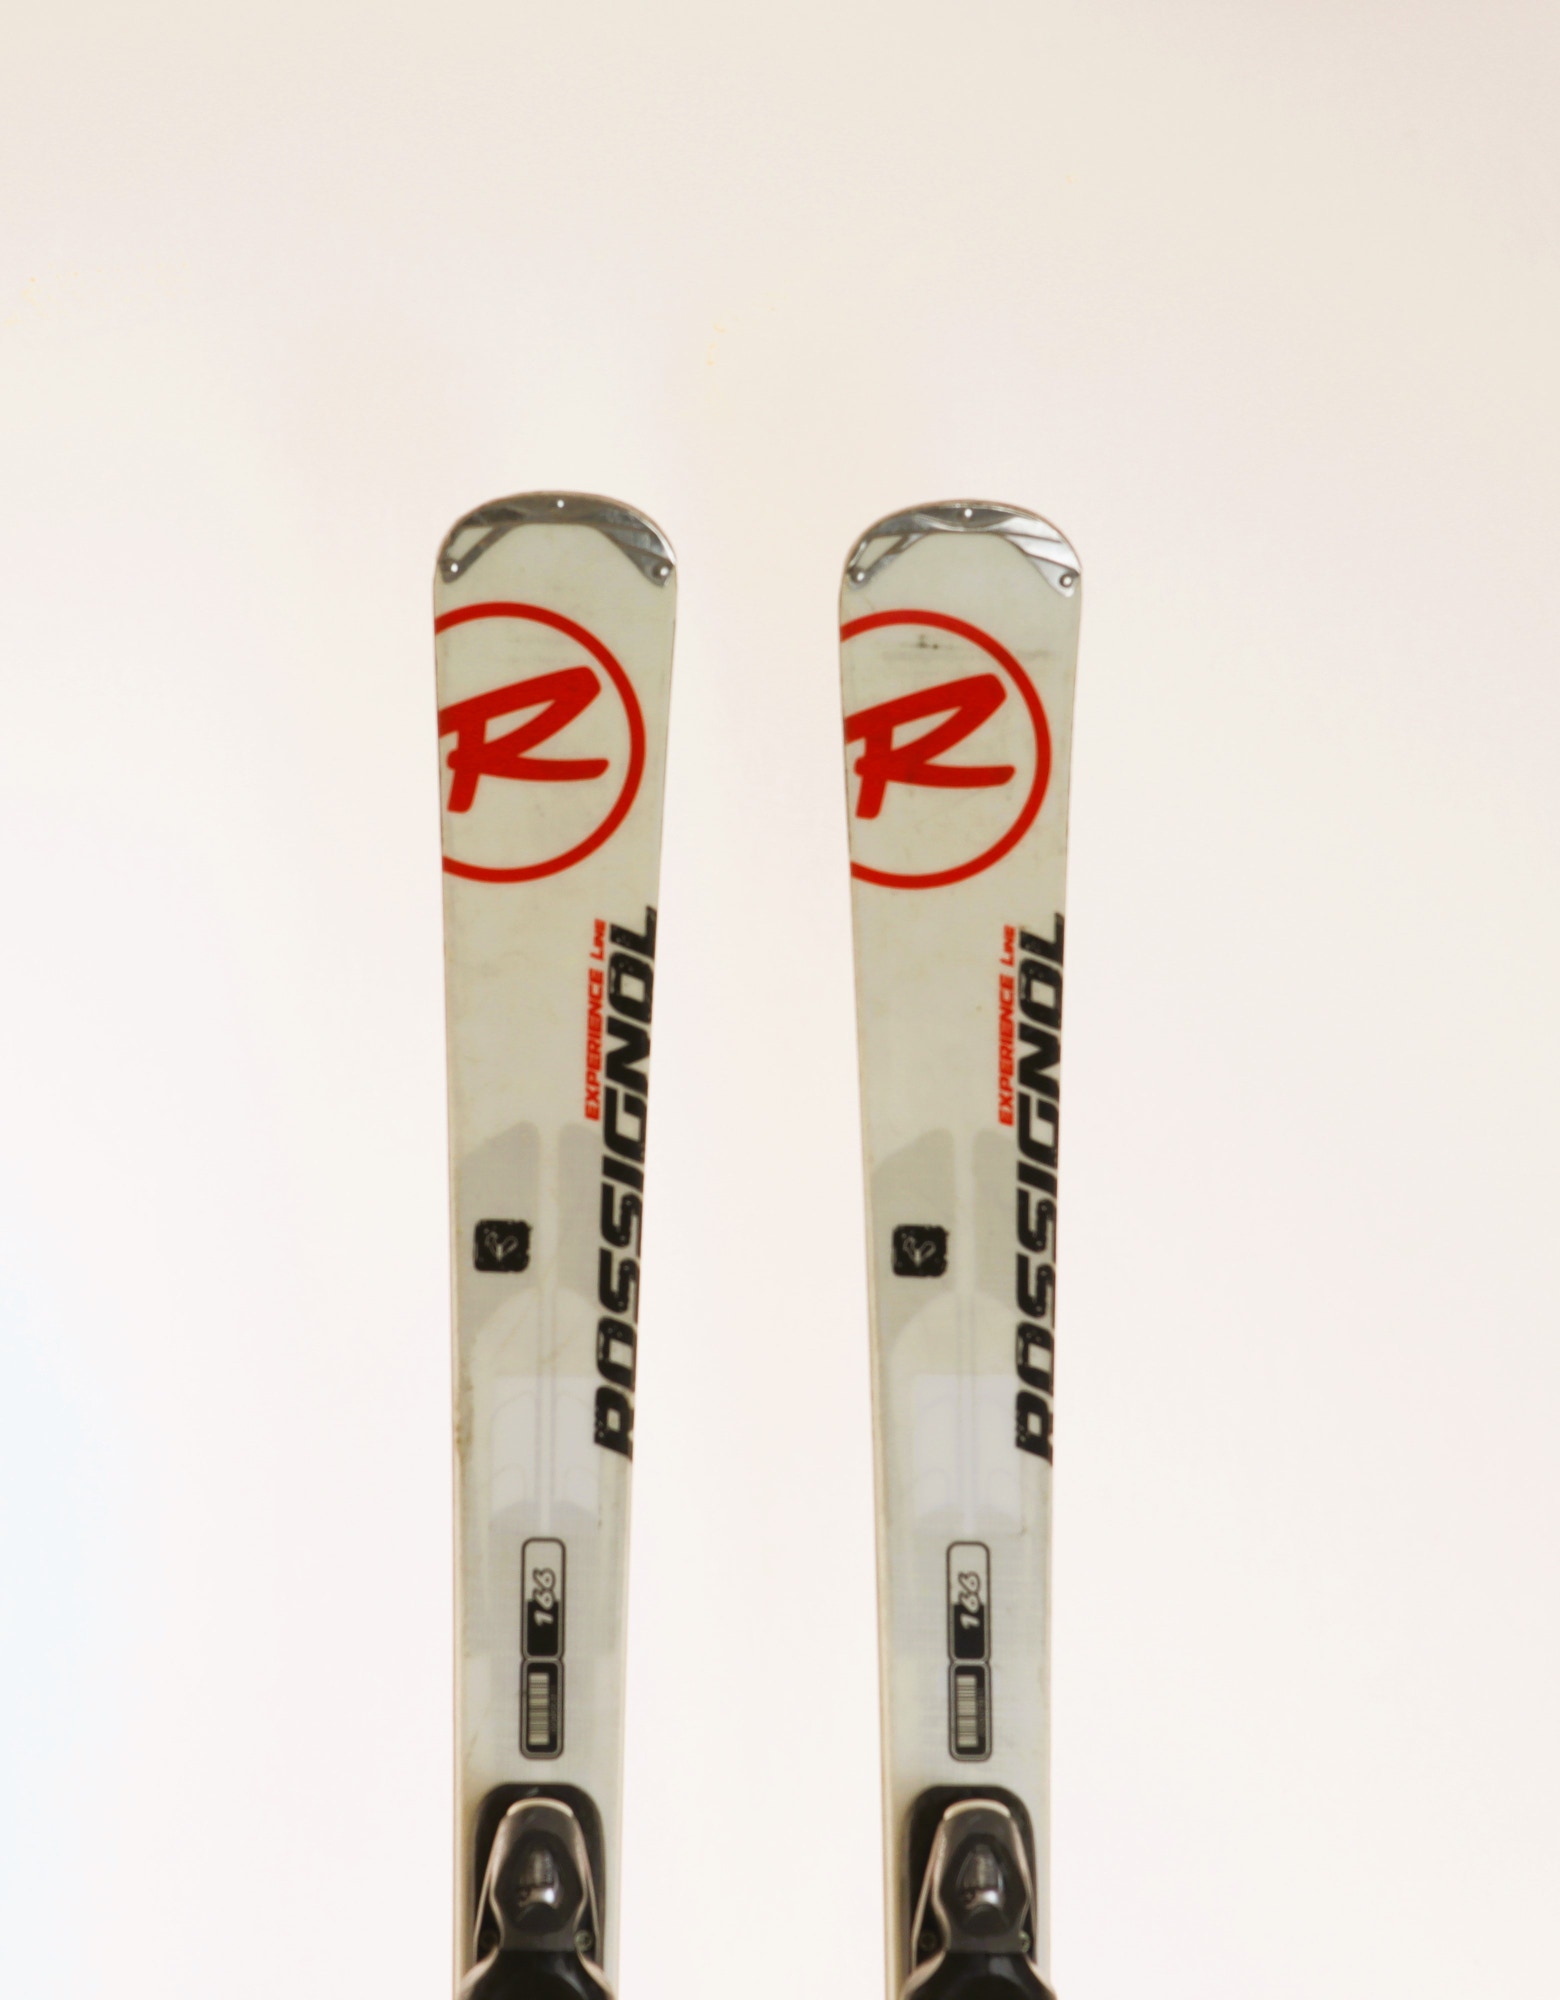 Used 2013 Rossignol Experience 74R Ski with Rossignol Axium 100 bindings, Size 166 (Option 231092)